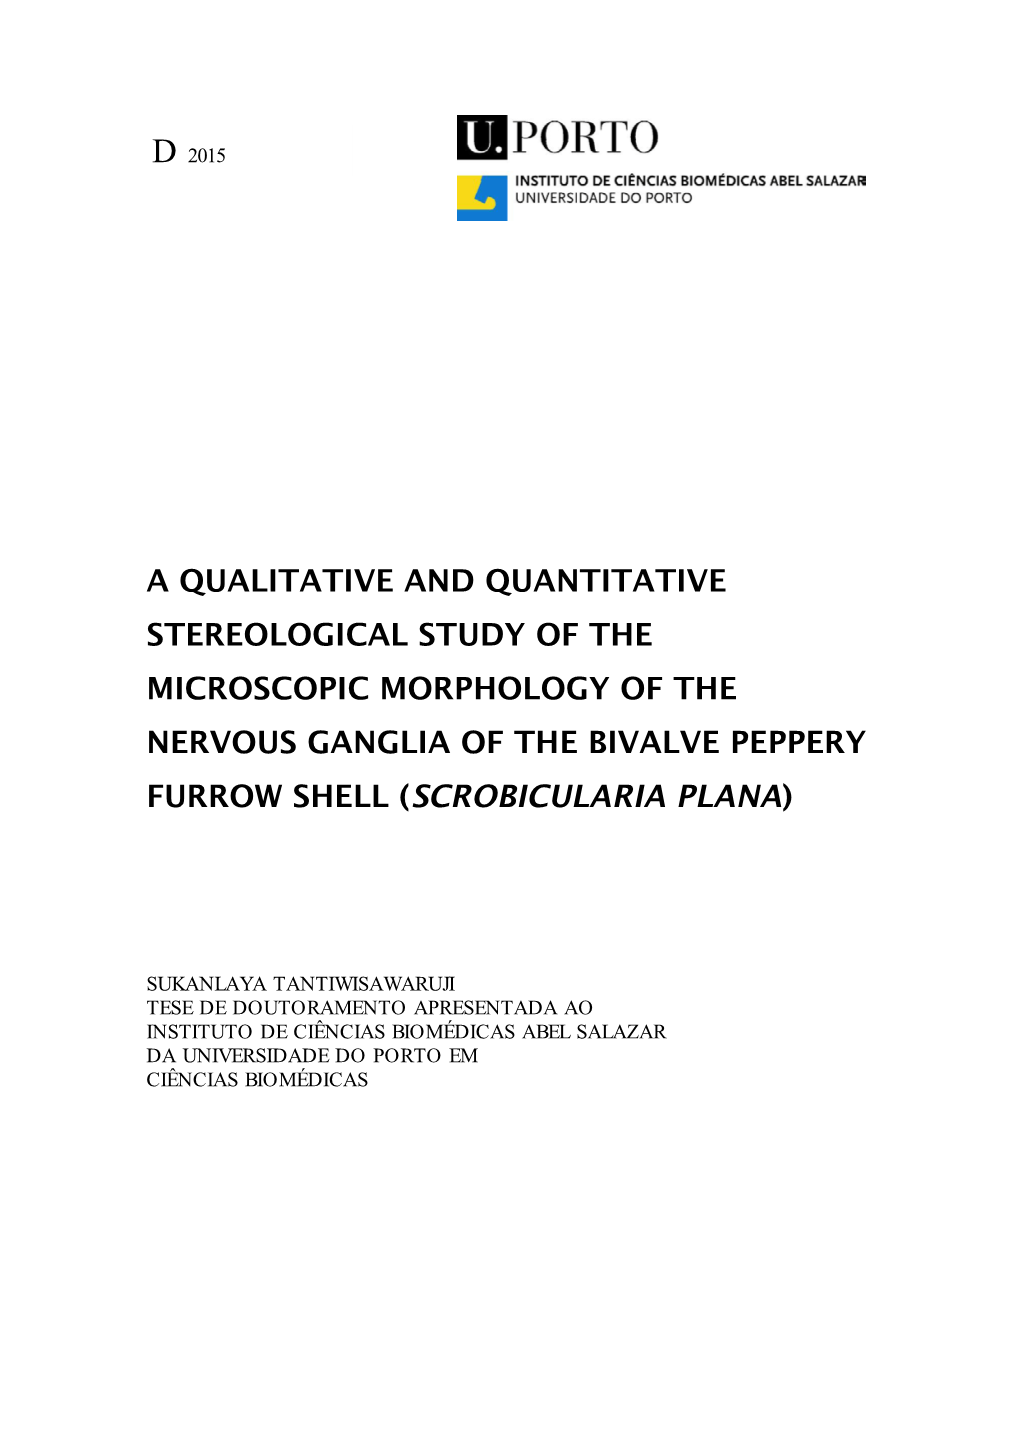 A Qualitative and Quantitative Stereological Study of the Microscopic Morphology of the Nervous Ganglia of the Bivalve Peppery Furrow Shell (Scrobicularia Plana)